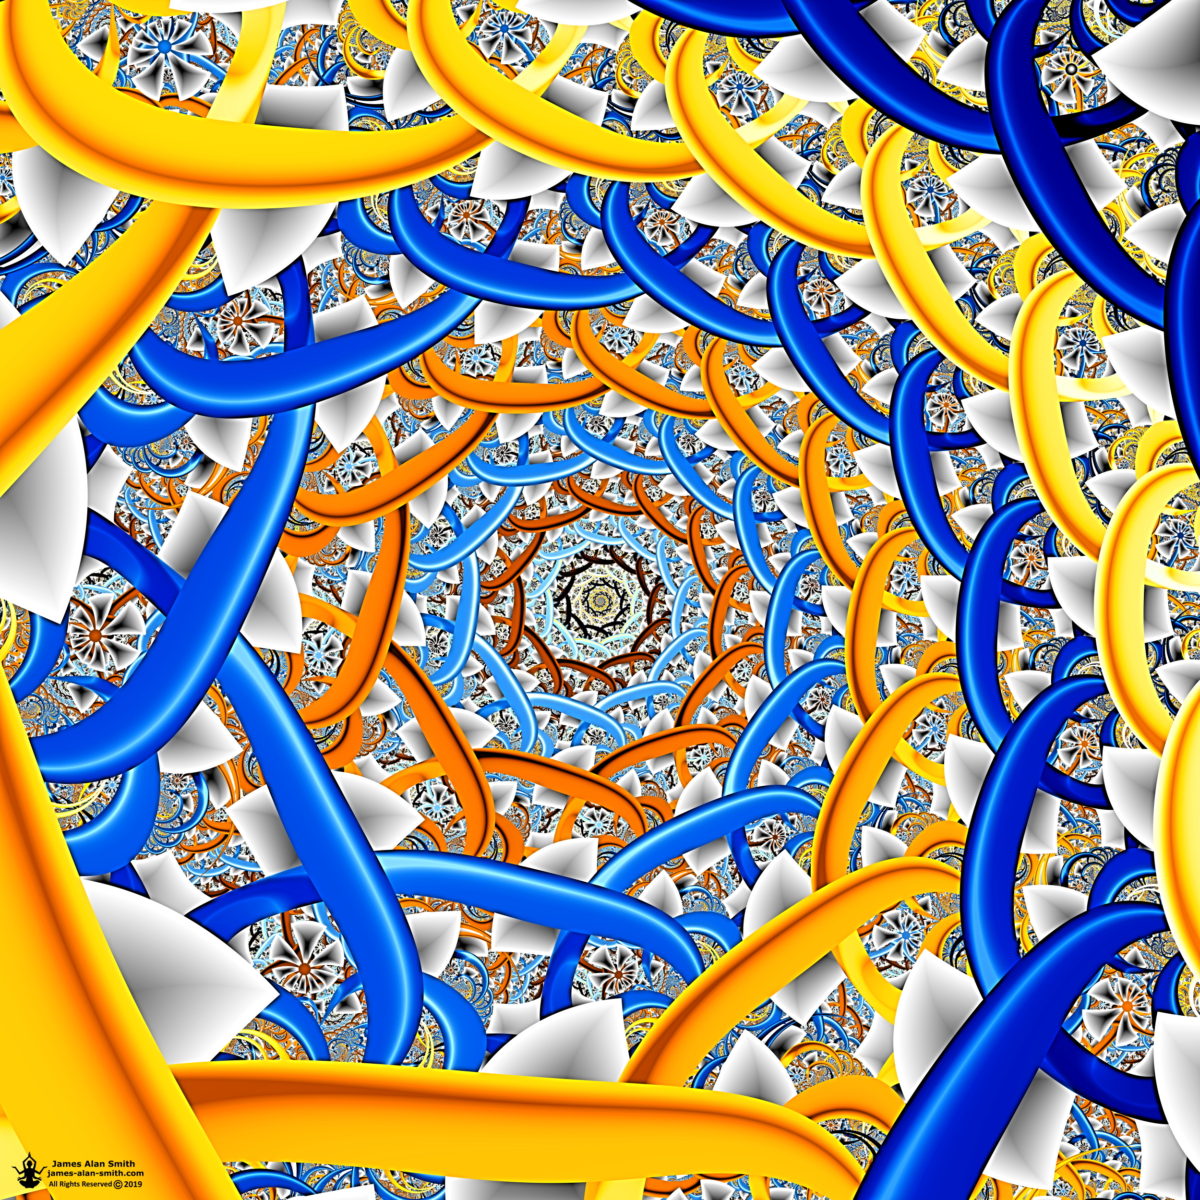 Chain-linked Fractal: Artwork by James Alan Smith